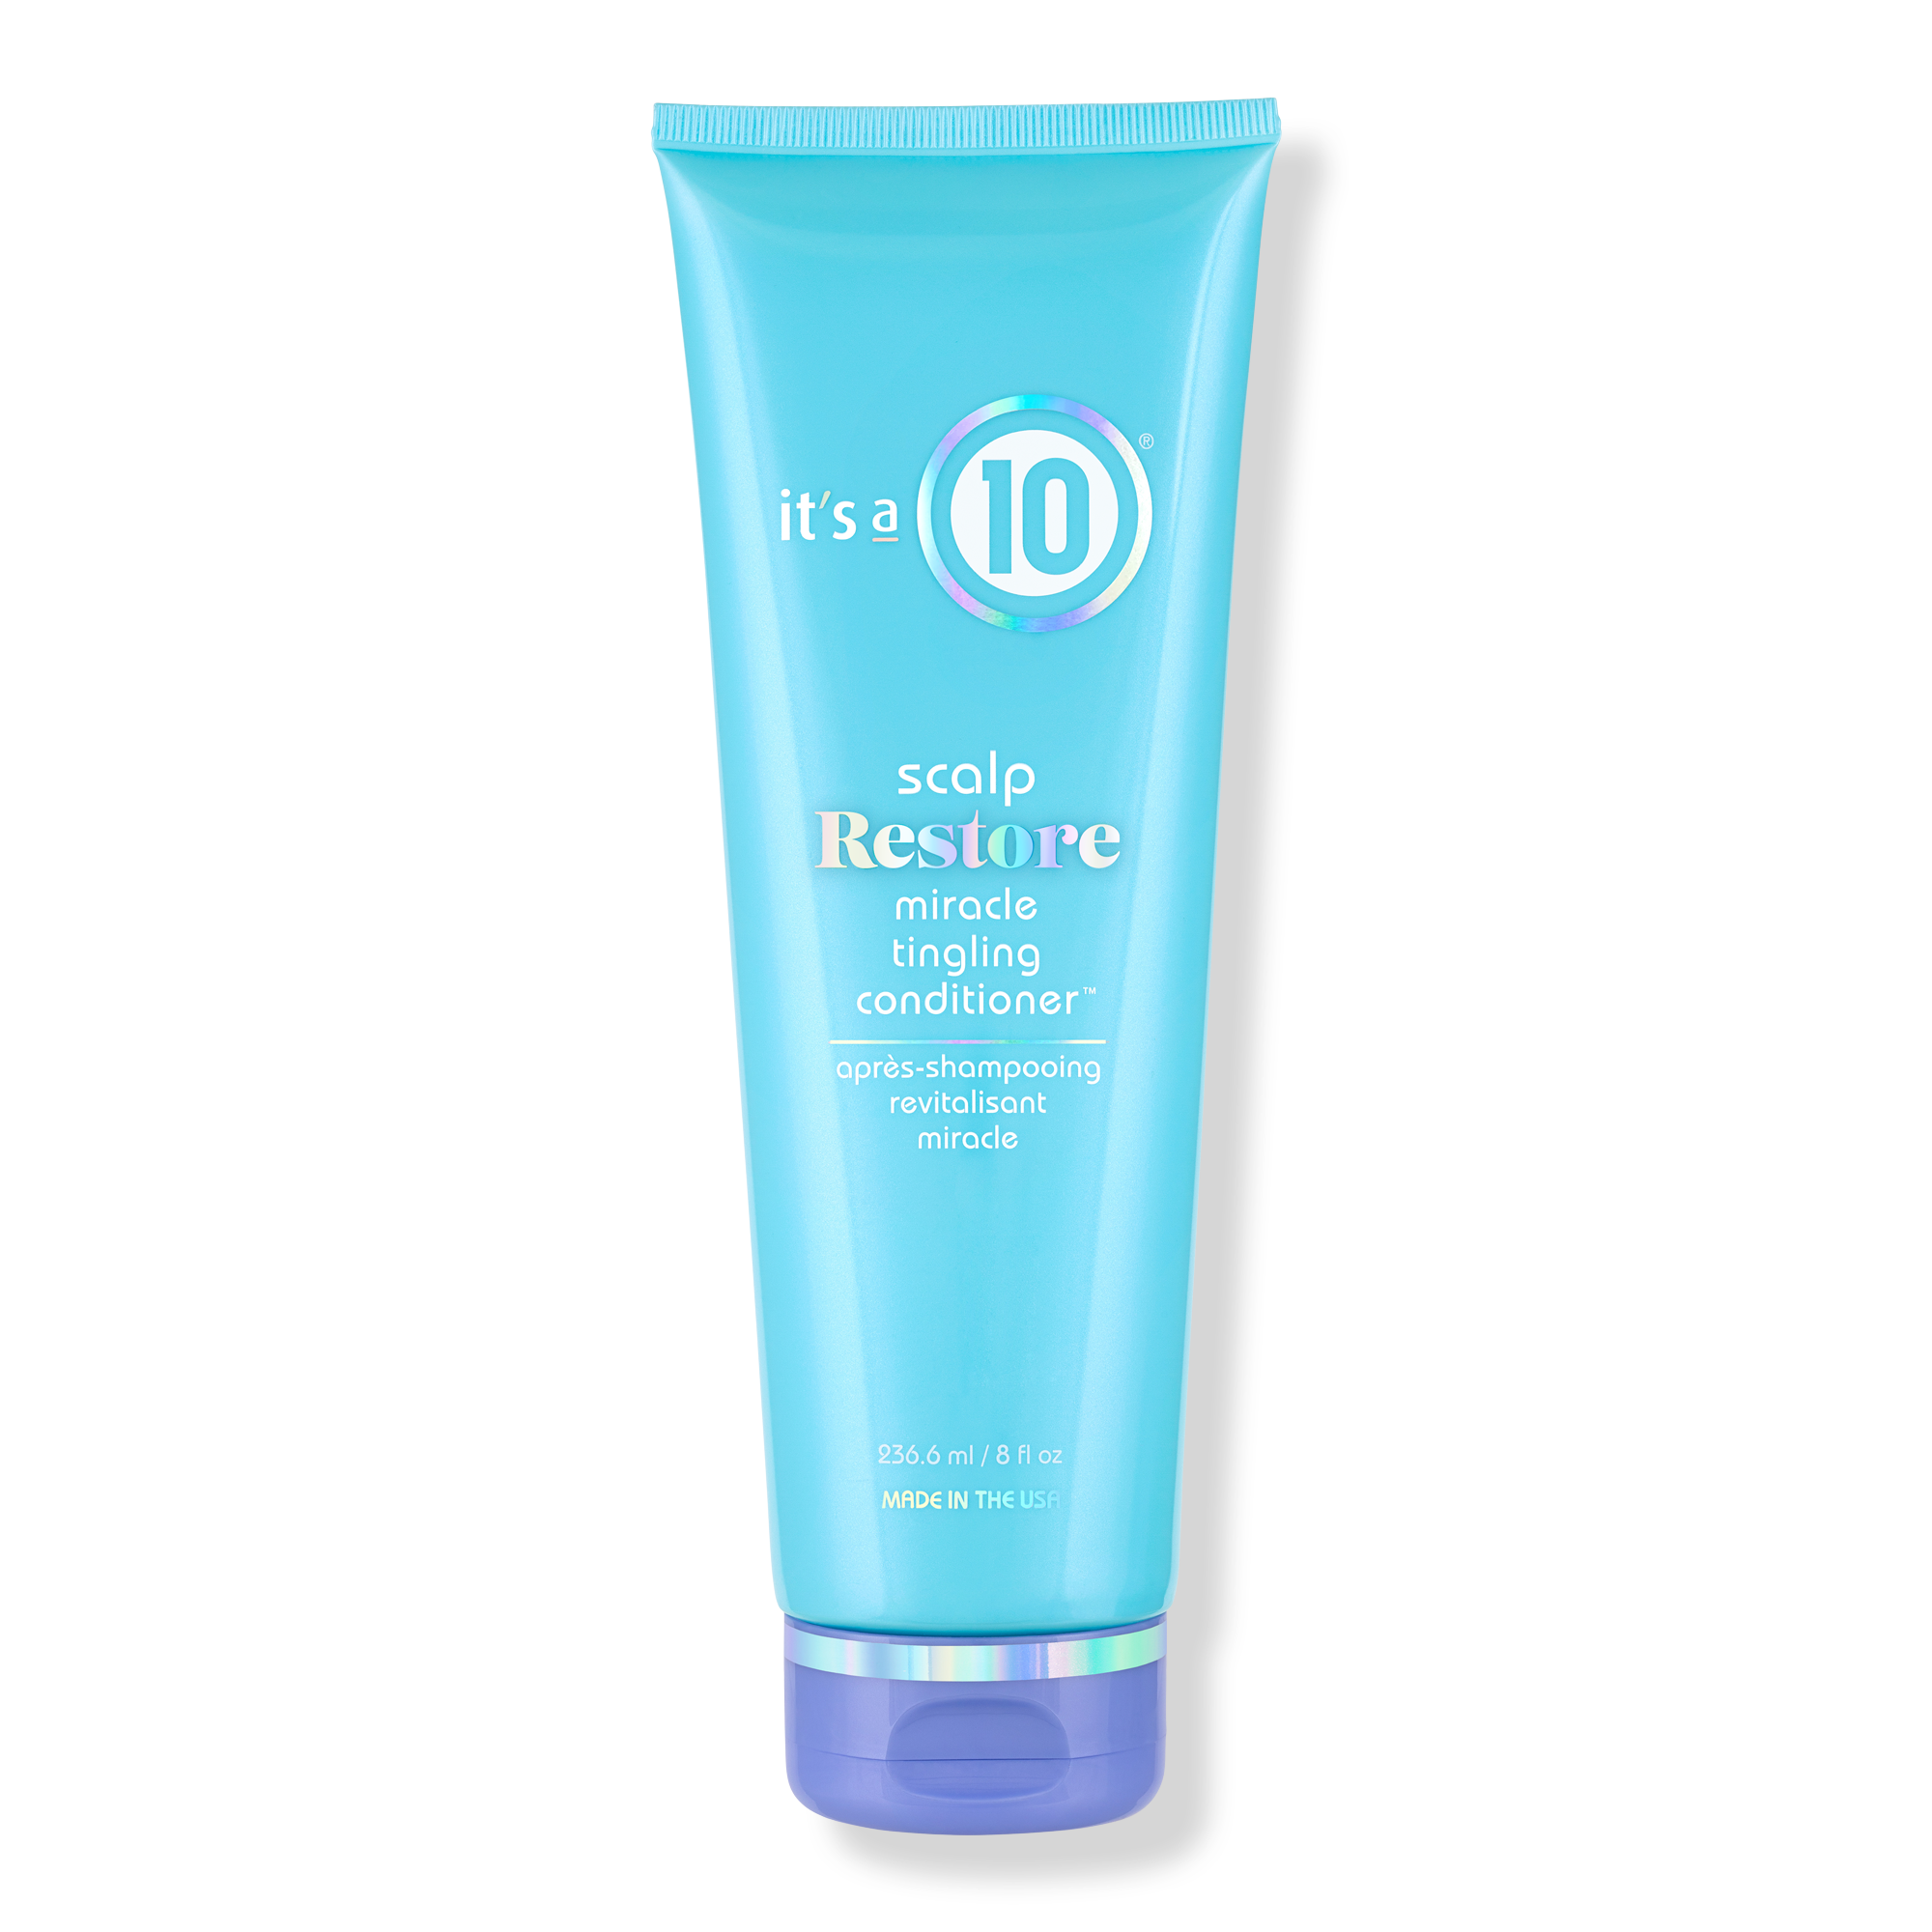 It's a 10 Scalp Restore Miracle Tingling Conditioner / 8OZ